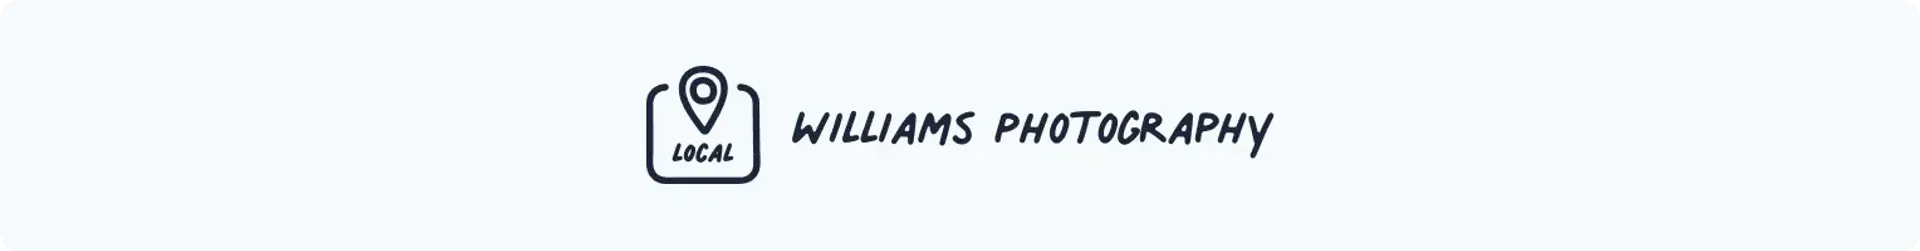 Williams Photography